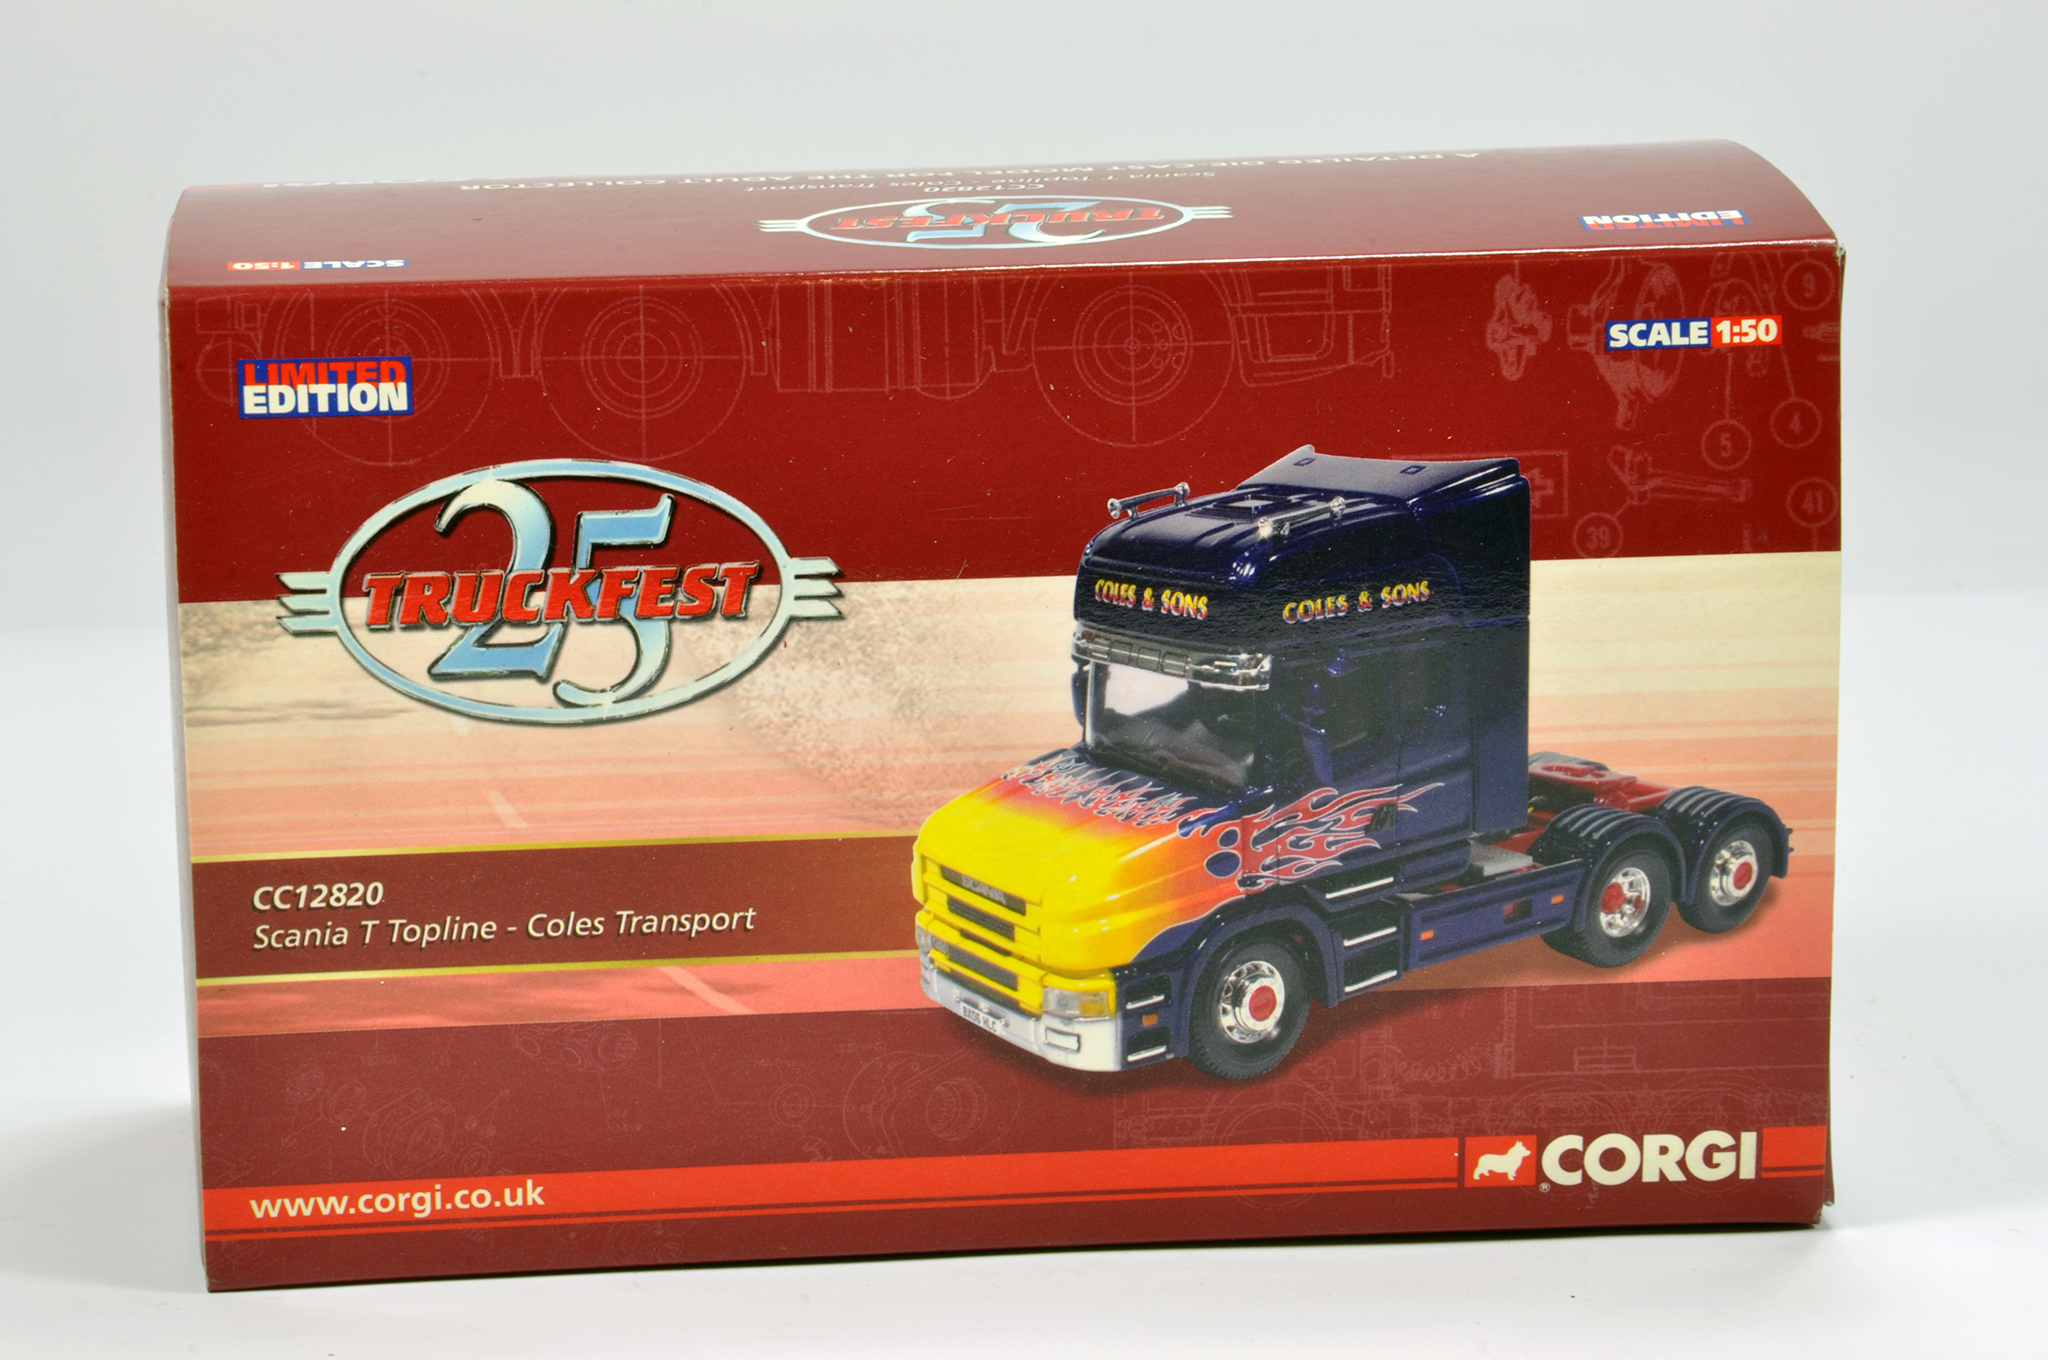 Corgi Commercial Diecast Issue No. CC12820 Scania T Topline. Coles Transport. NM to M in Box.